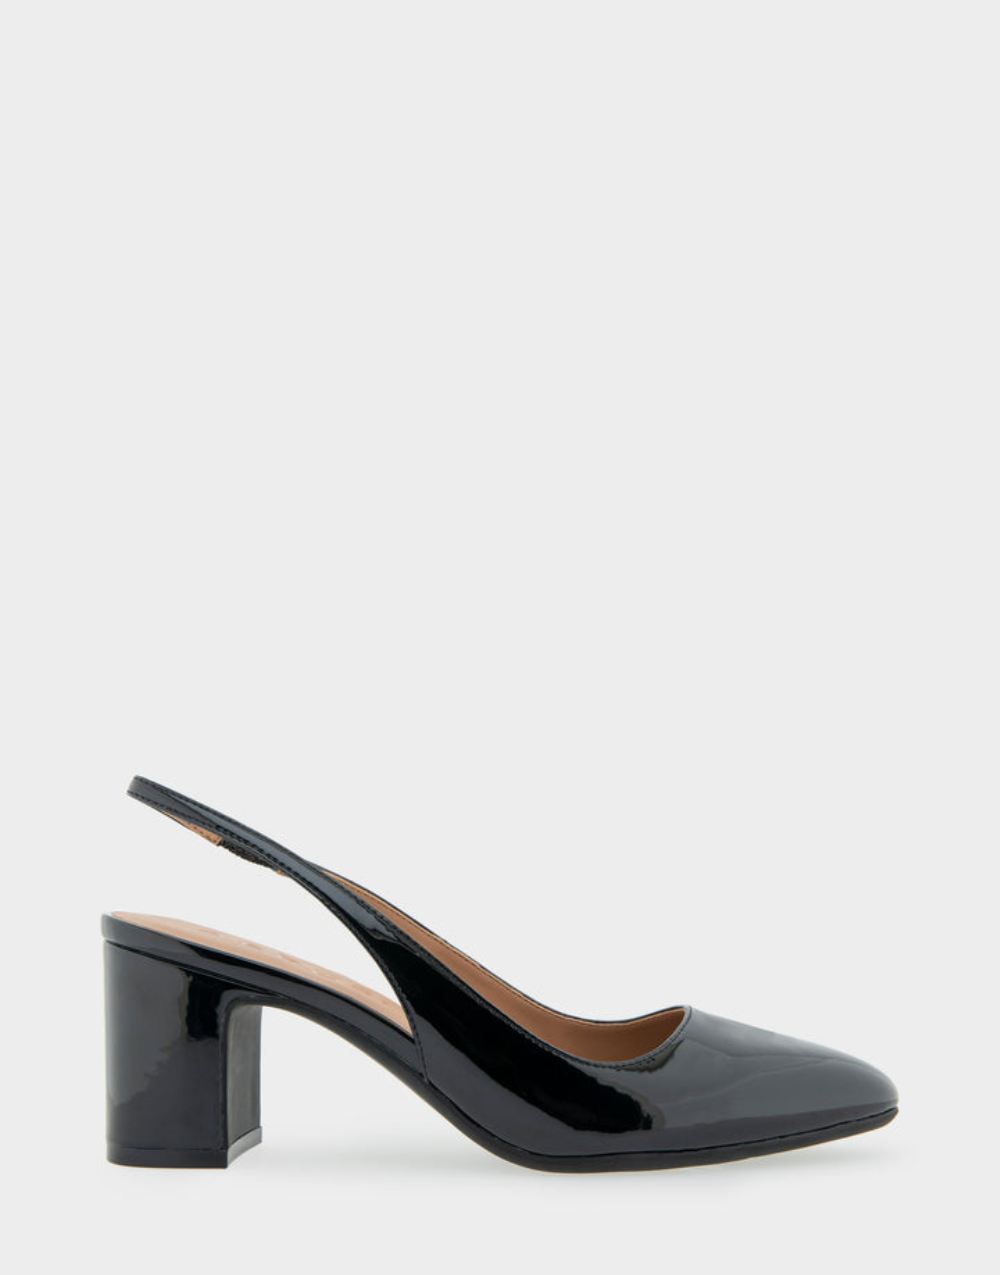 Women's | Mags Black Patent Faux Leather Slingback Mid-Heel Pump